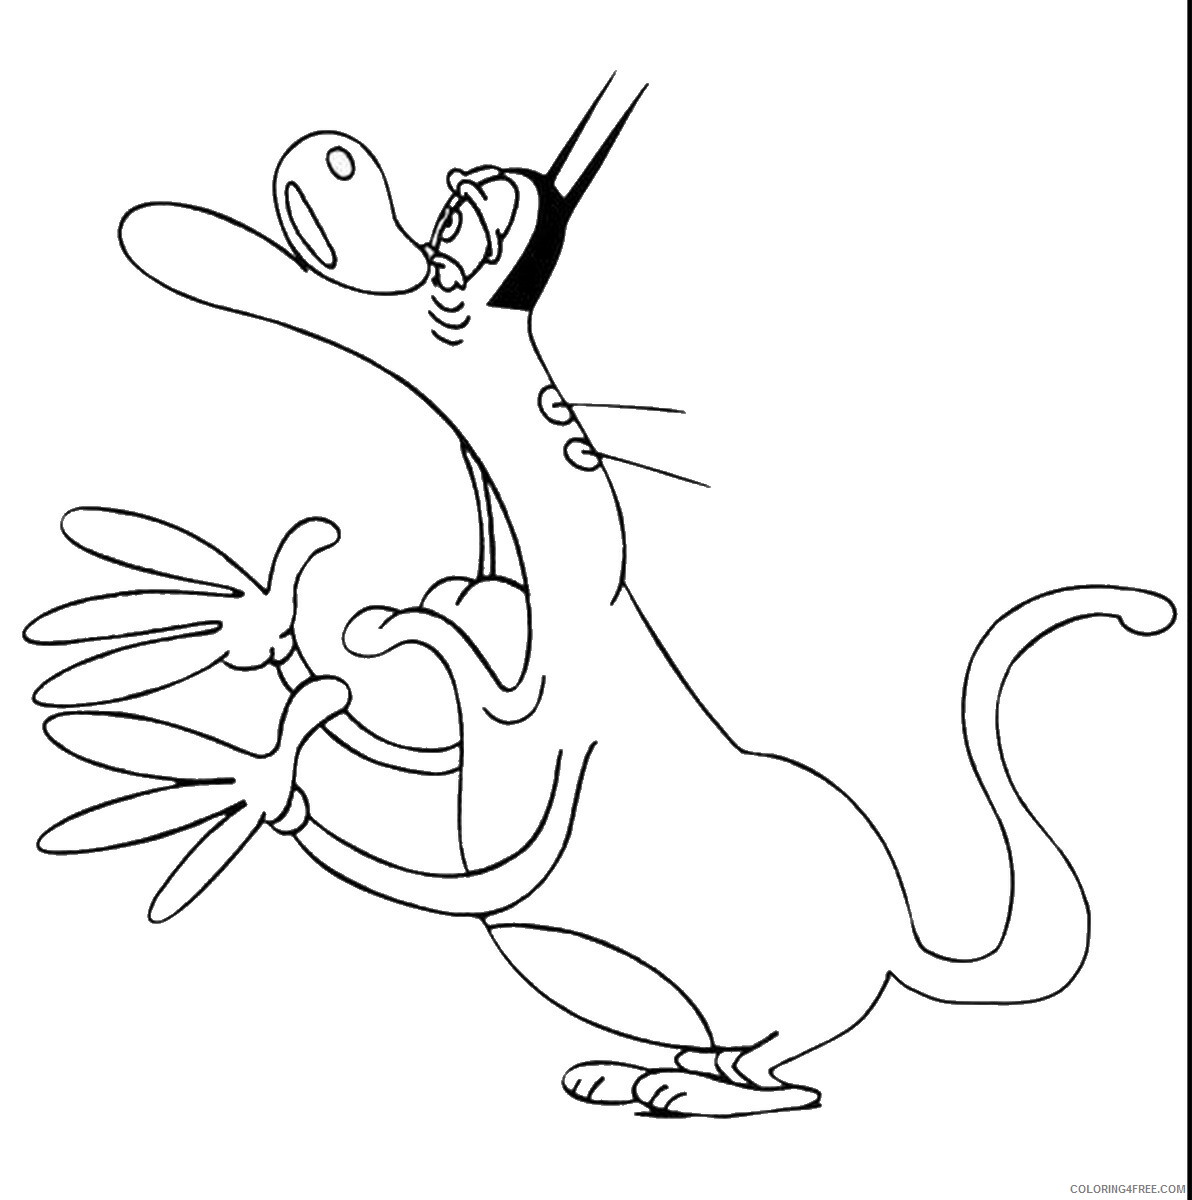 Oggy and the Cockroaches Coloring Pages TV Film Printable 2020 05599 Coloring4free